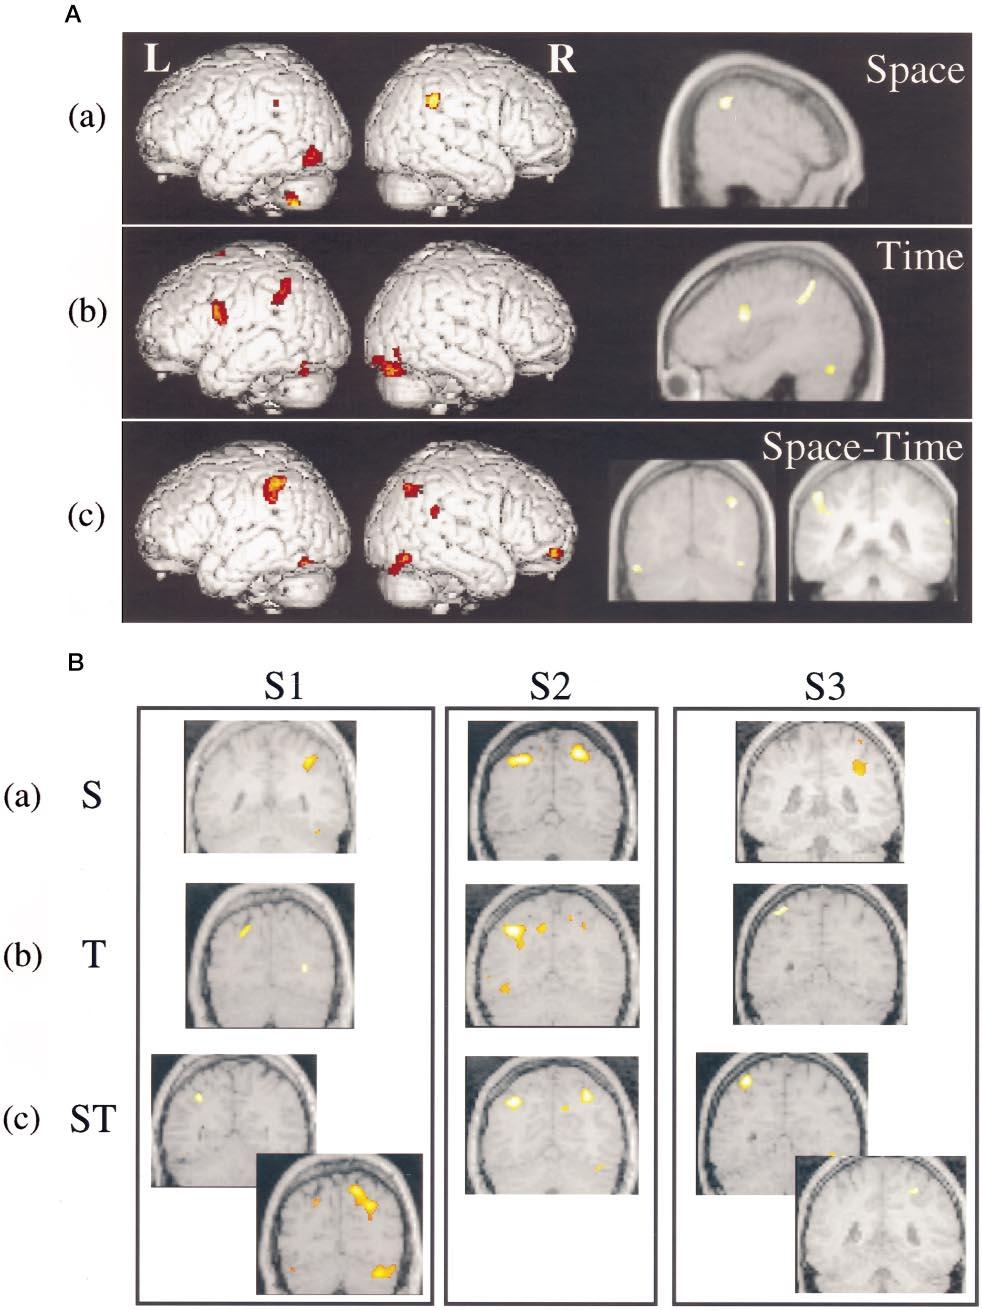 7432 J. Neurosci., September 15, 1998, 18(18):7426 7435 Coull and Nobre Hemispheric Lateralization for Attention to Space or Time Figure 3.